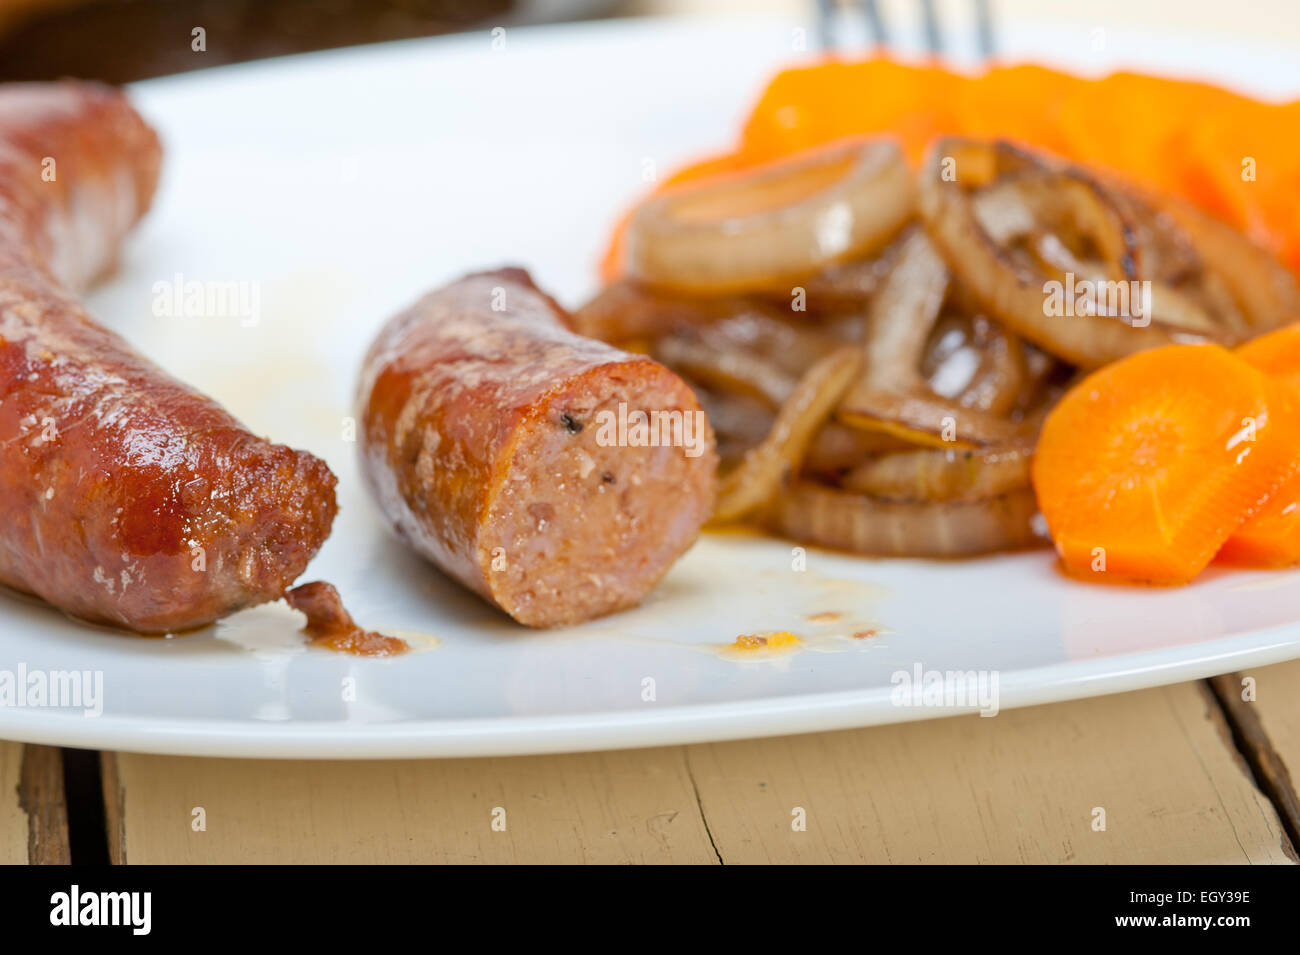 beef sausages cooked on iron skillet with carrot and onion Stock Photo